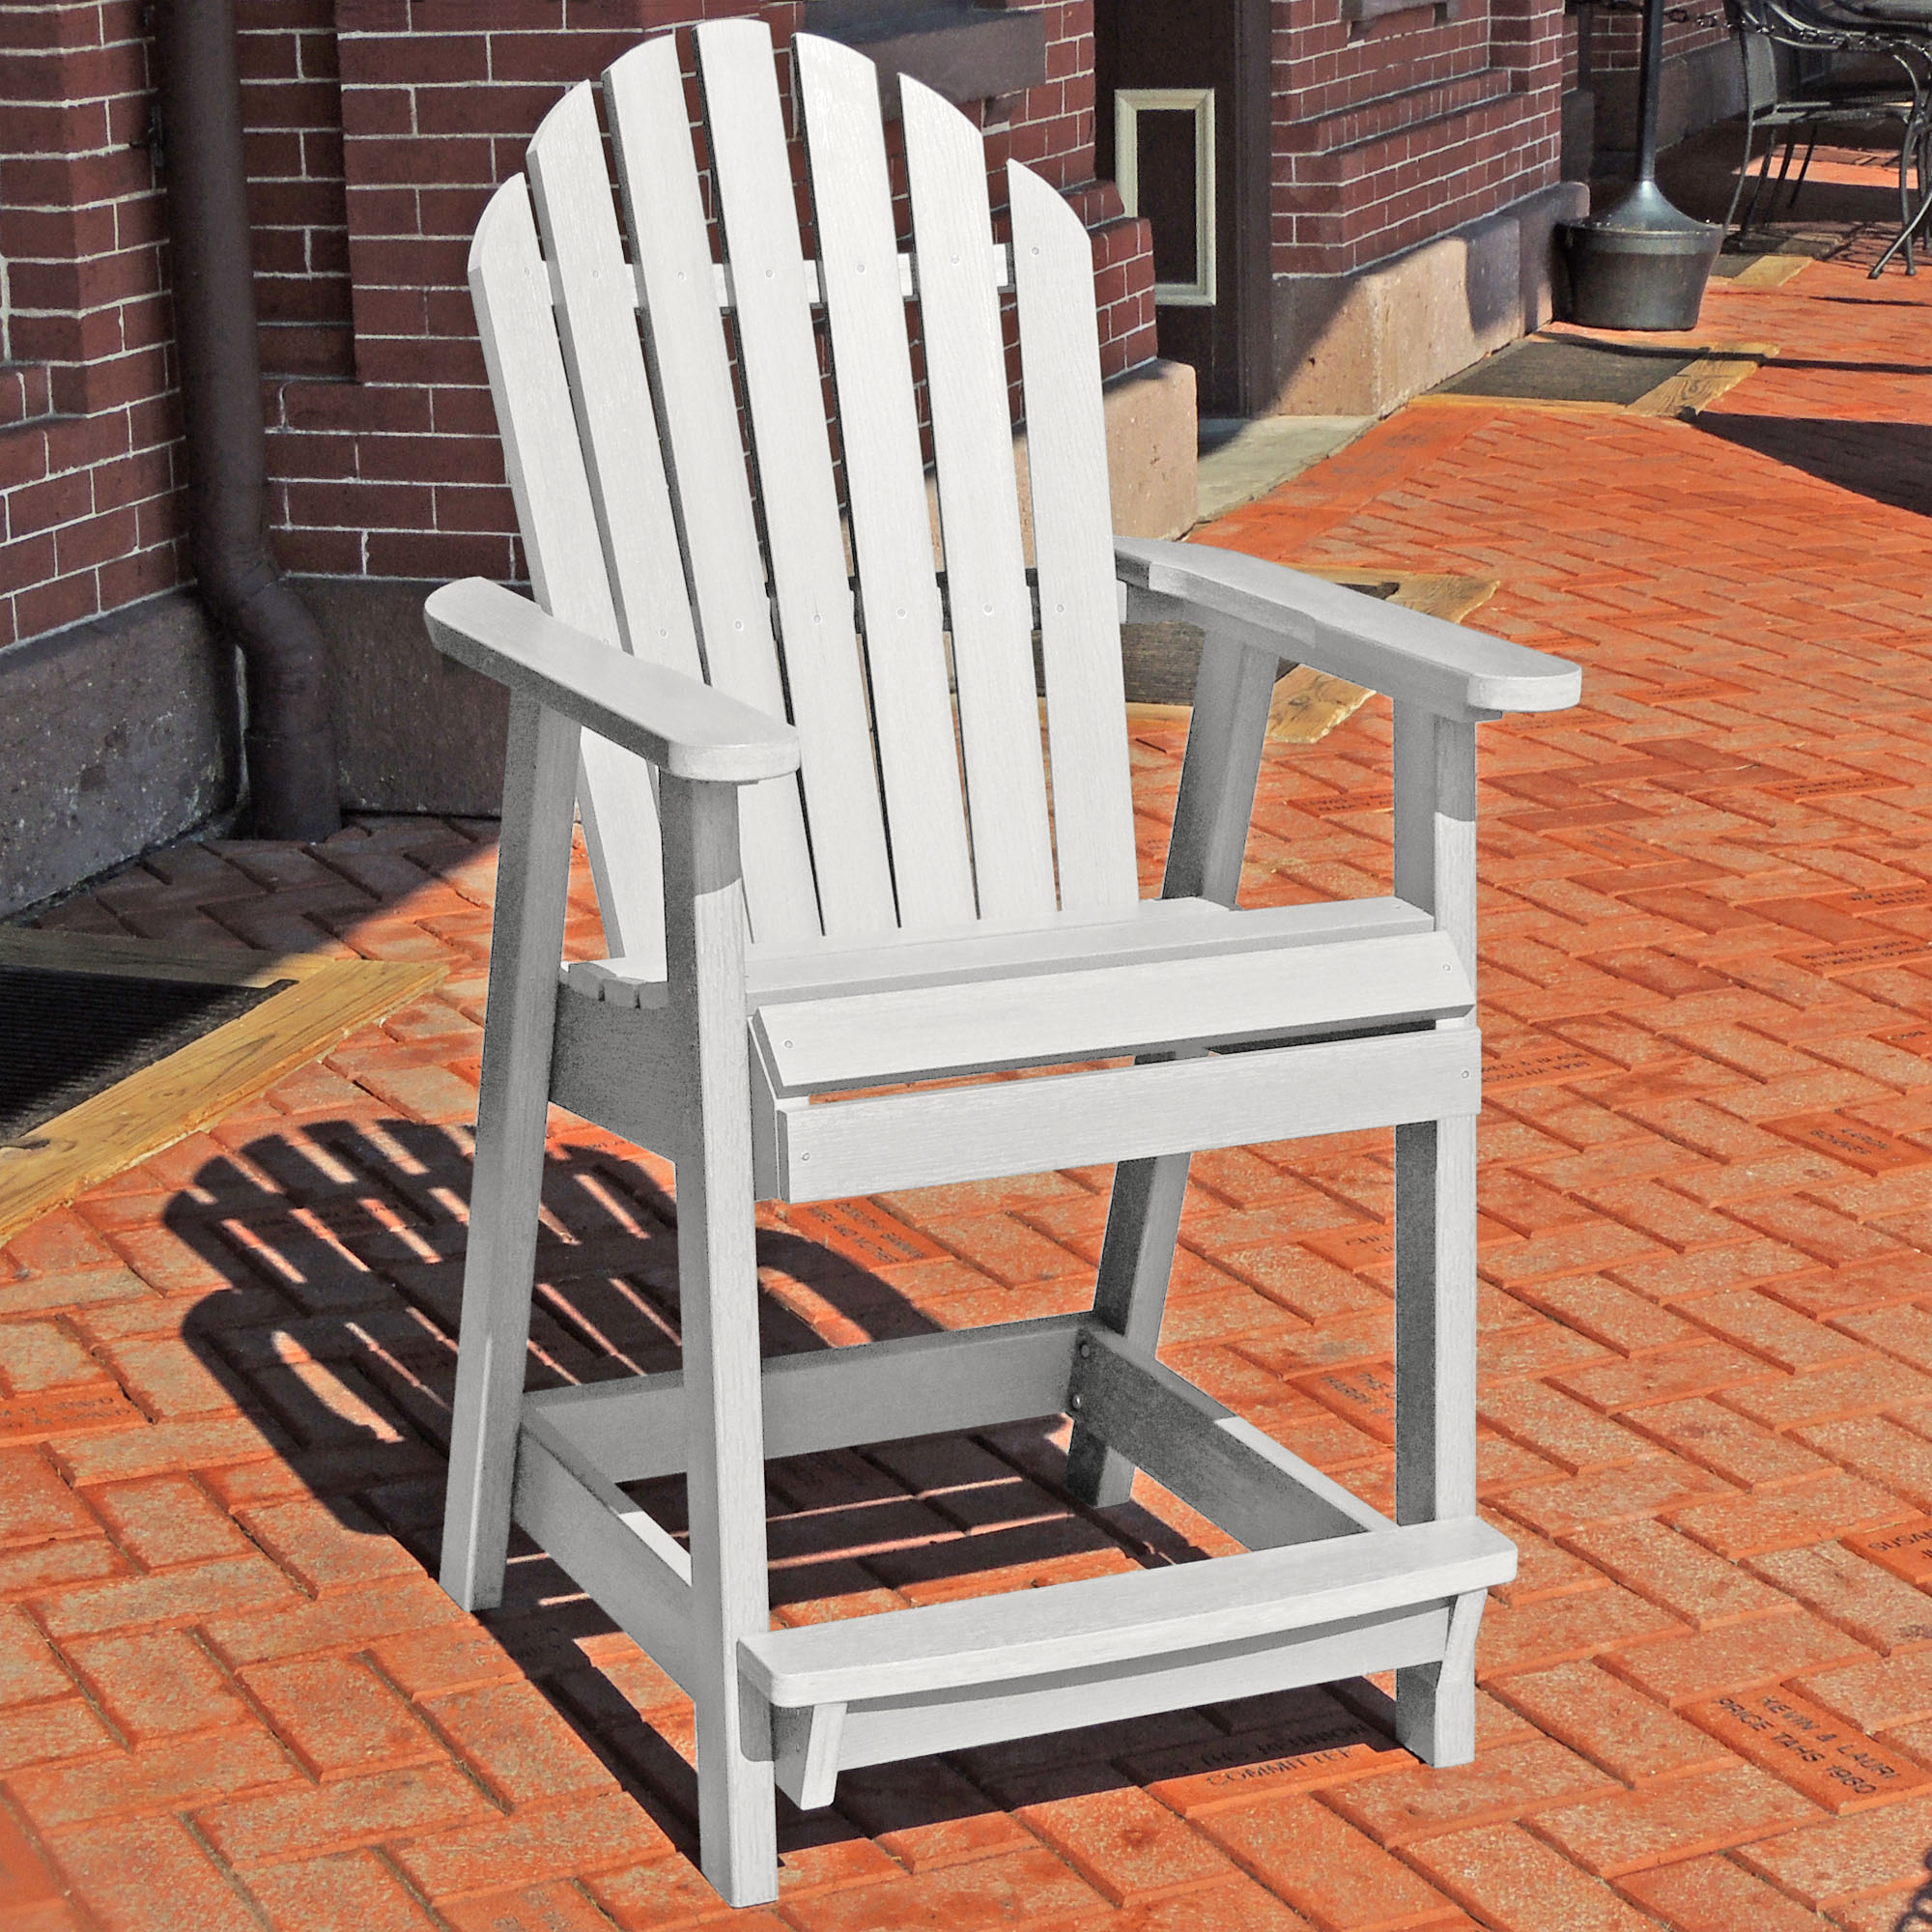 The Sequoia Professional Commercial Grade Muskoka Adirondack Deck Dining Chair in Counter Height - image 2 of 2